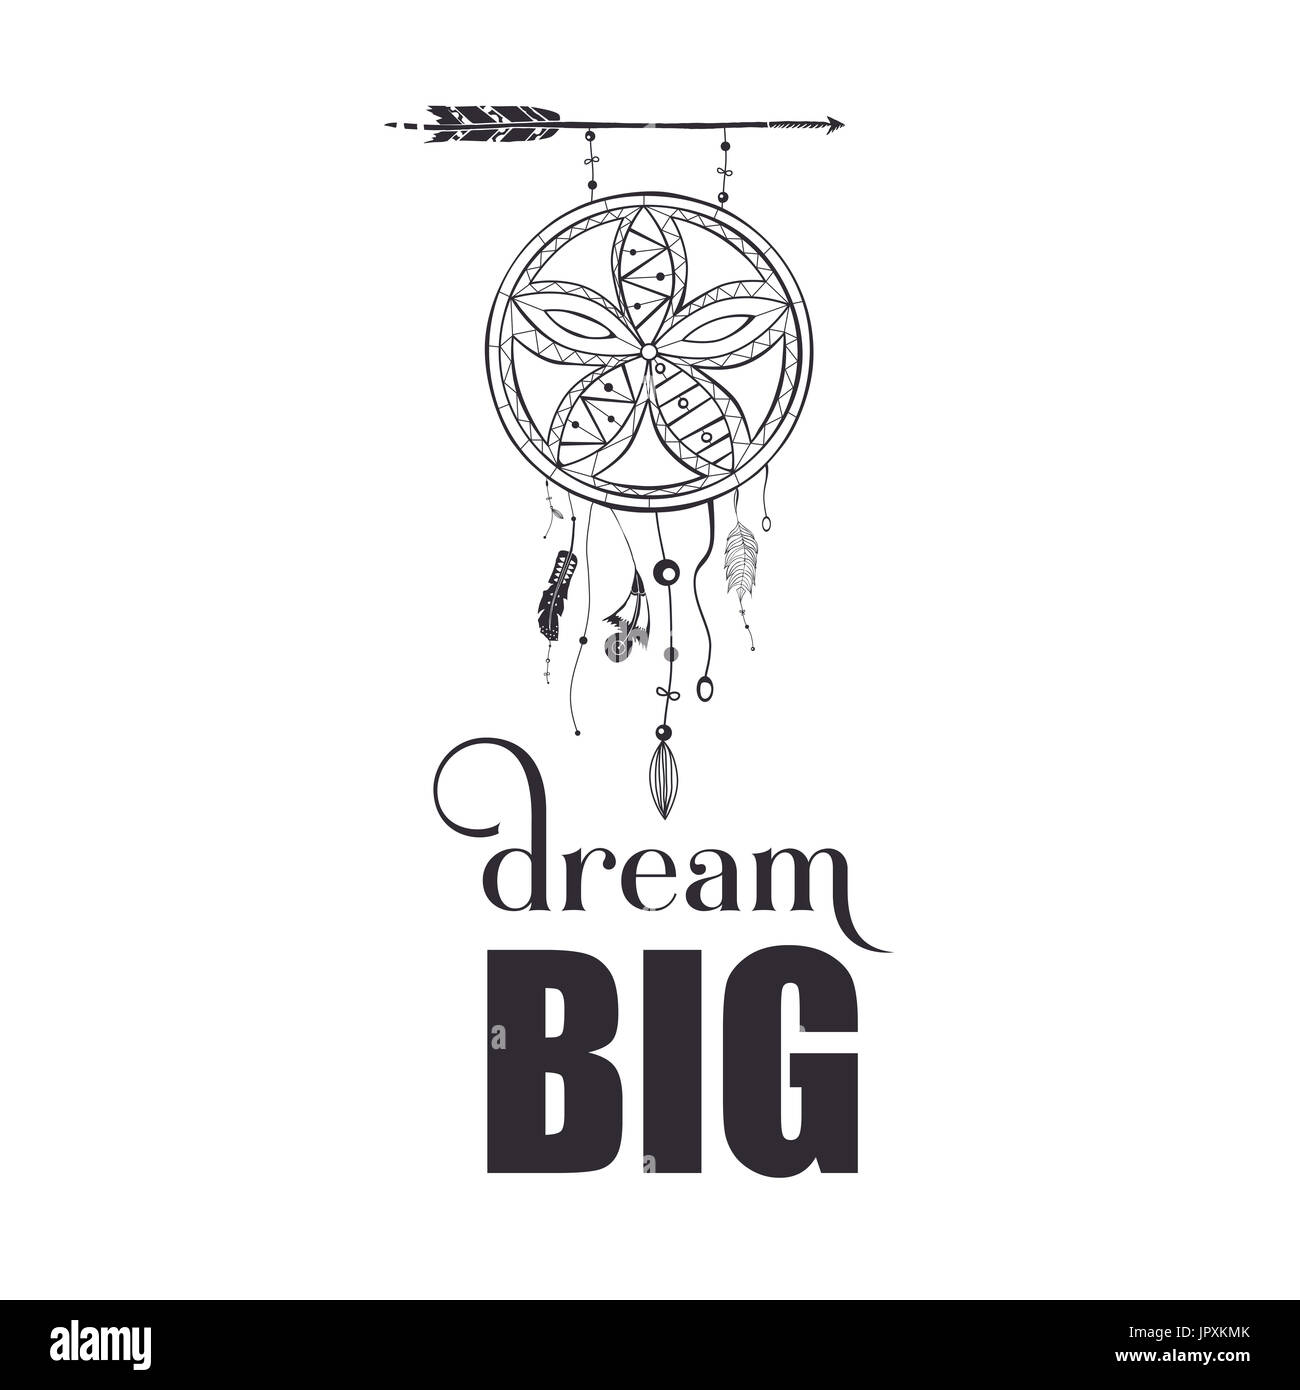 Black and white artwork with dream big inspirational quote and creative dream catcher visual Stock Photo